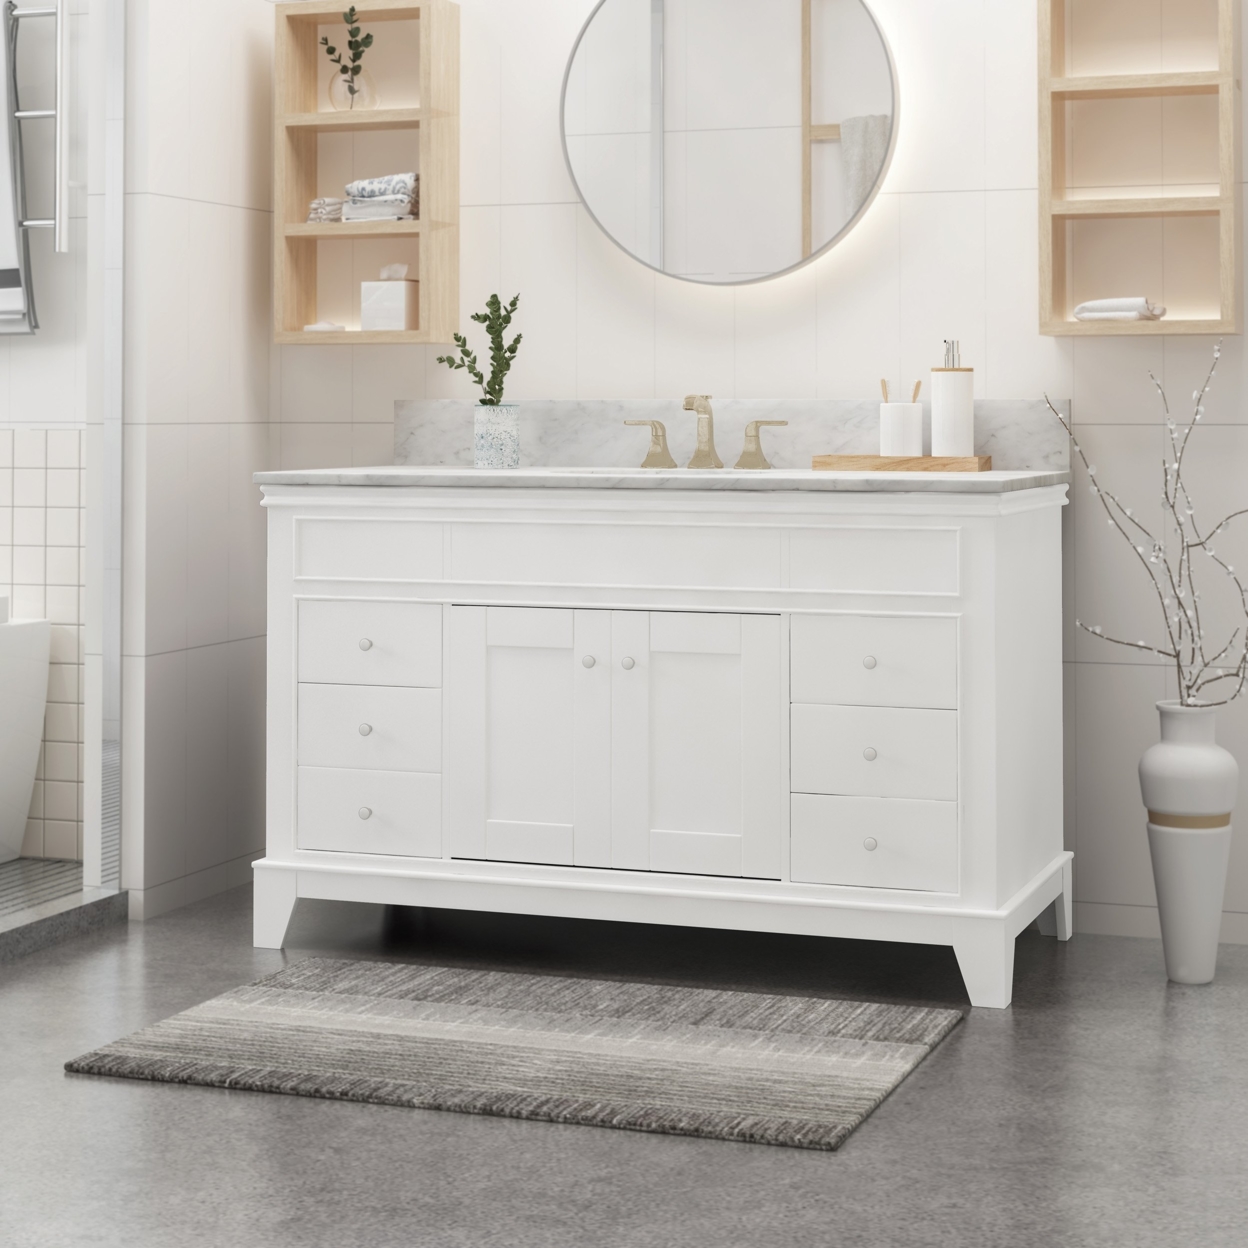 Feldspar Contemporary 48 Wood Single Sink Bathroom Vanity With Marble Counter Top With Carrara White Marble - Gray